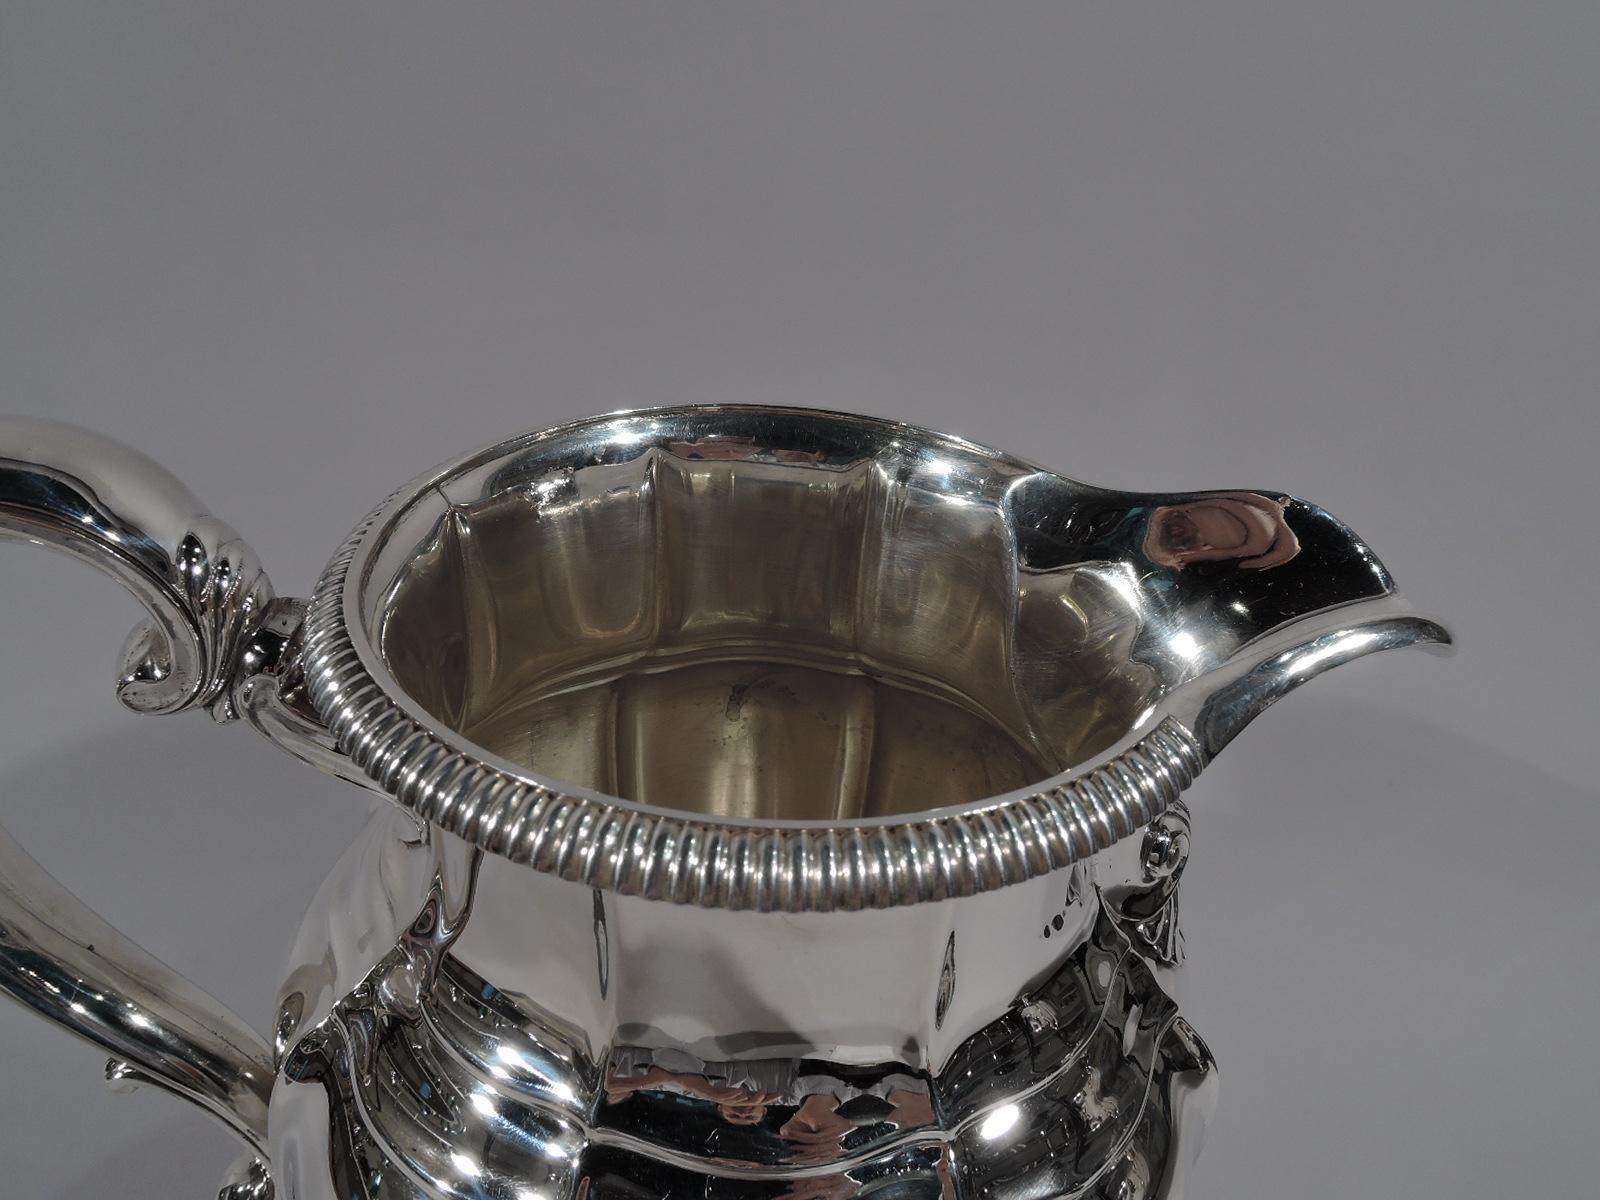 Modern classical sterling silver water pitchers made by Gorham in Providence, circa 1930. Lobed baluster body, U-spout with scallop shell at base, capped scroll handle, and raised foot. Gadrooning. Fully marked including no. 531/1 and volume (4 7/8